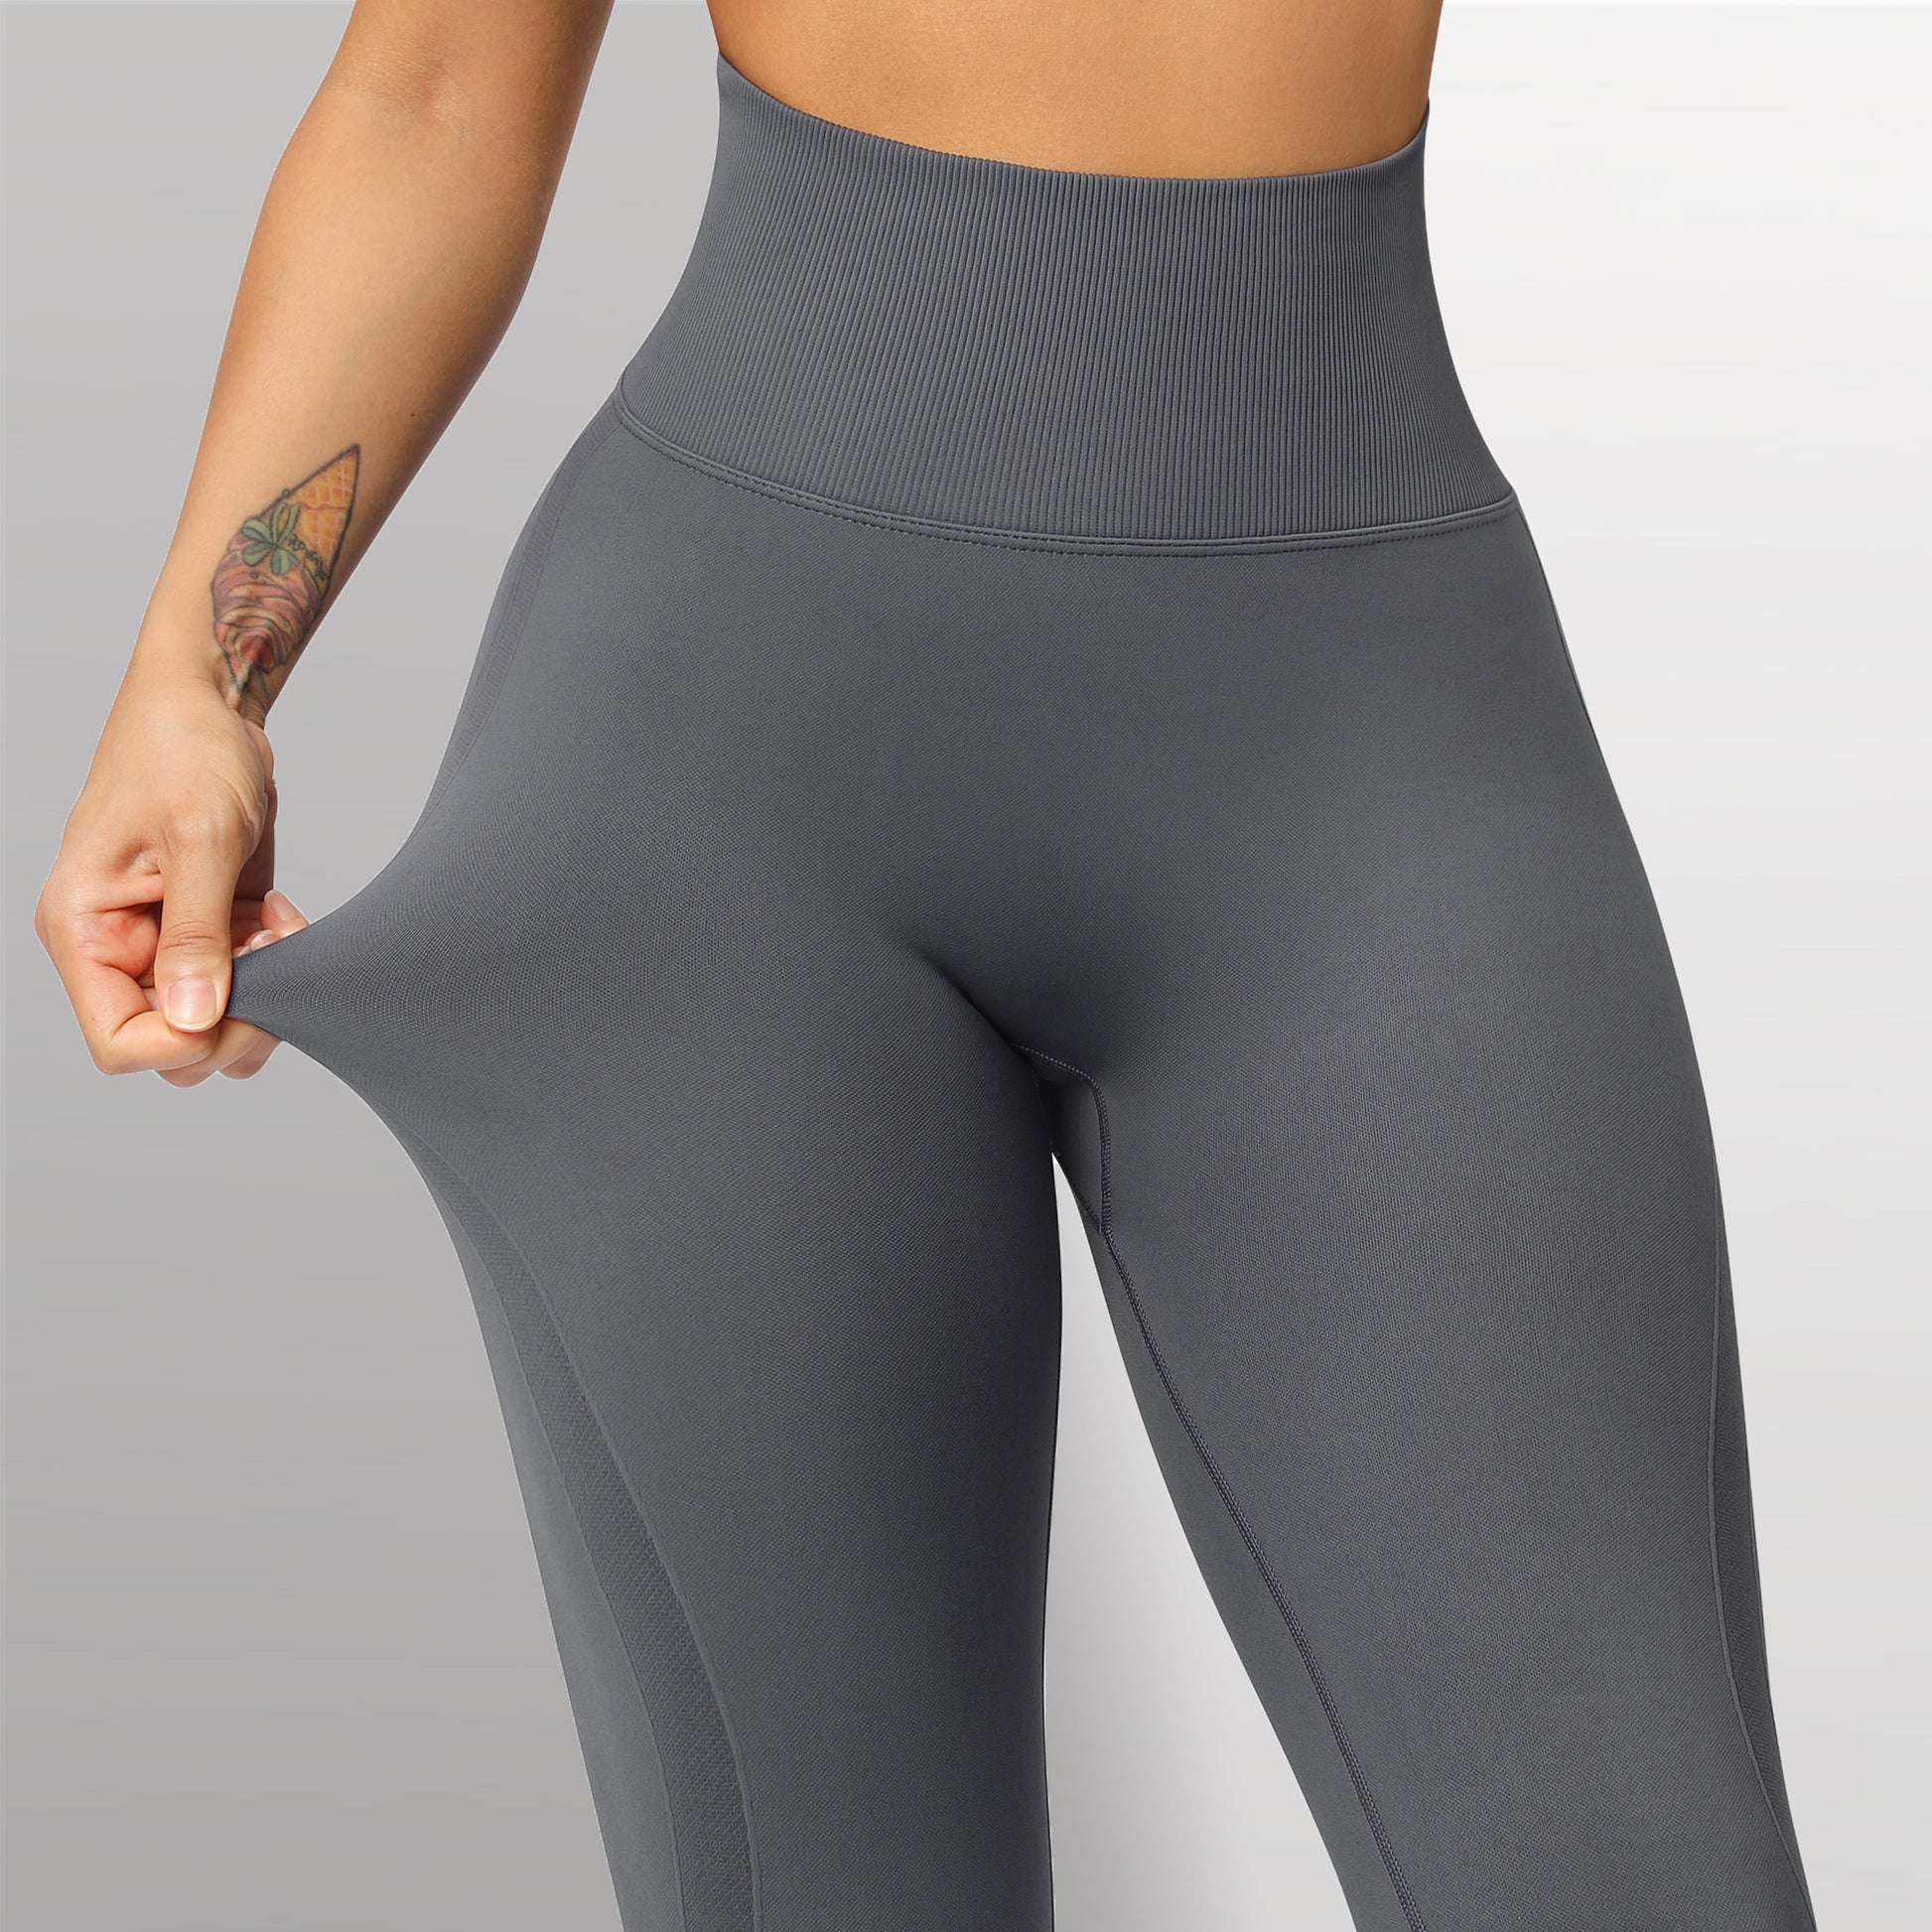 LL High Waist Seamless Yoga Workout Leggings With Pockets With